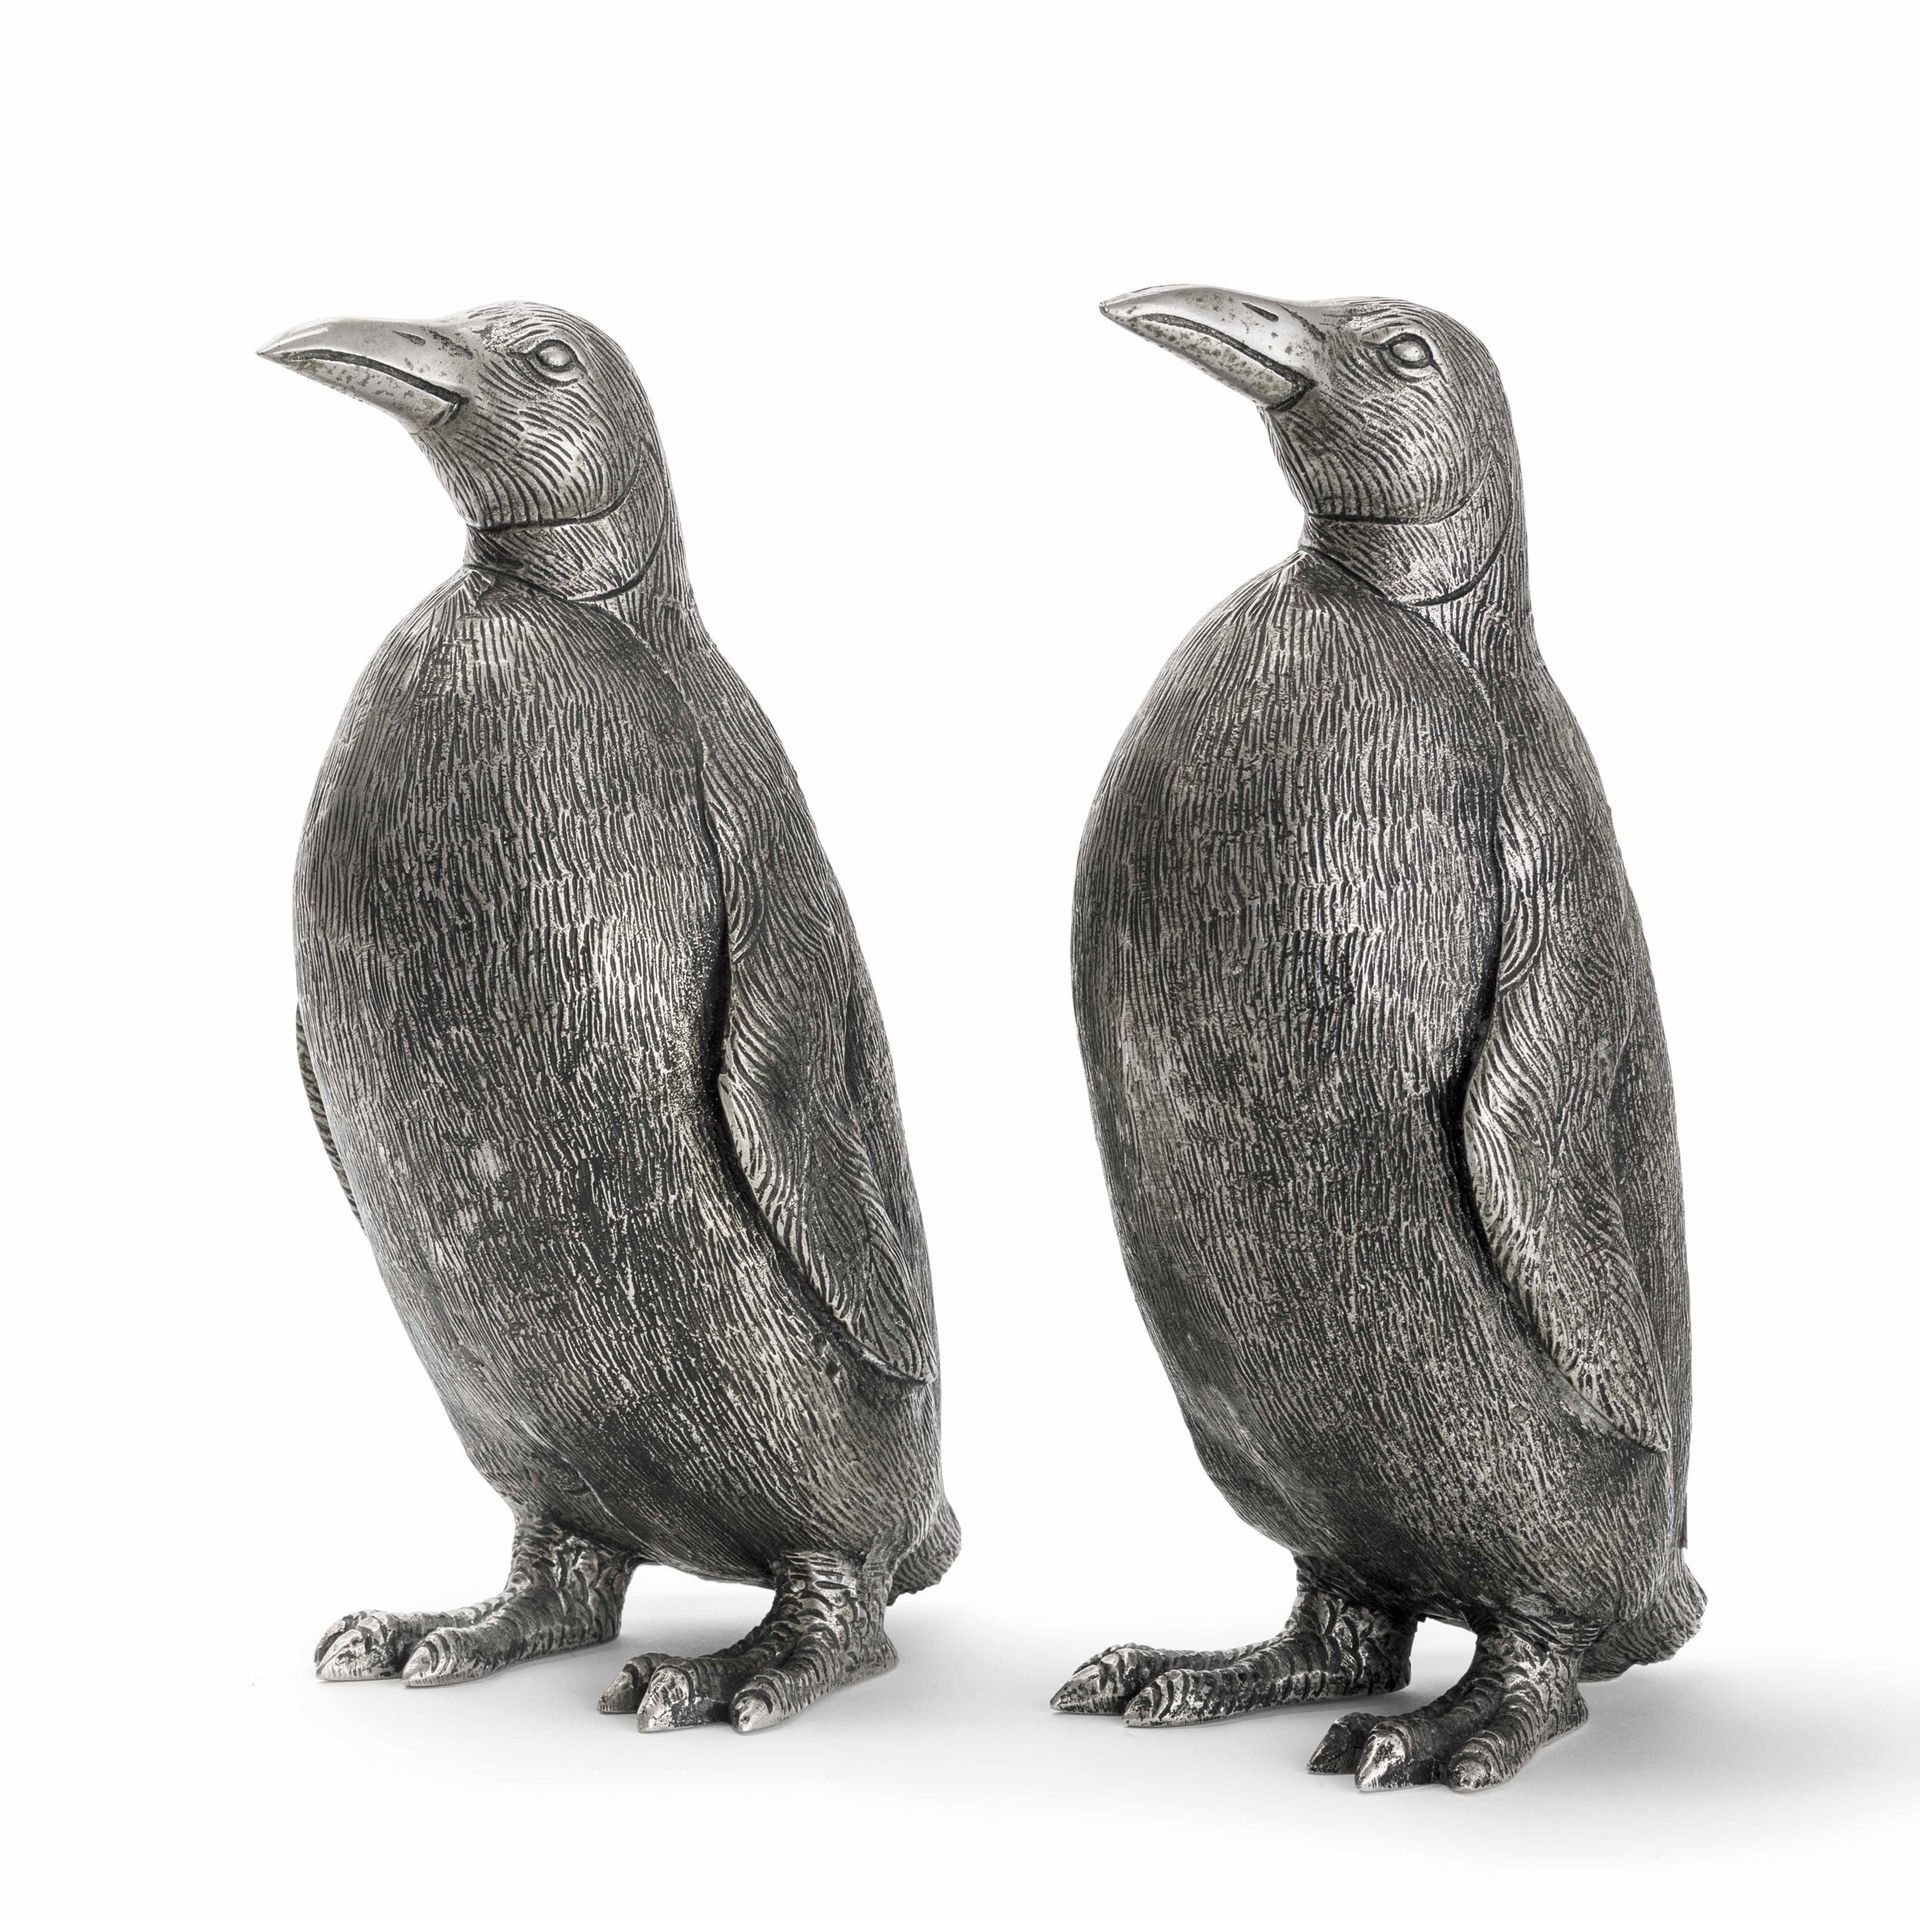 Gucci, Firenze, 1970ca A pair of penguin-shaped containers in silver-plated meta&hellip;